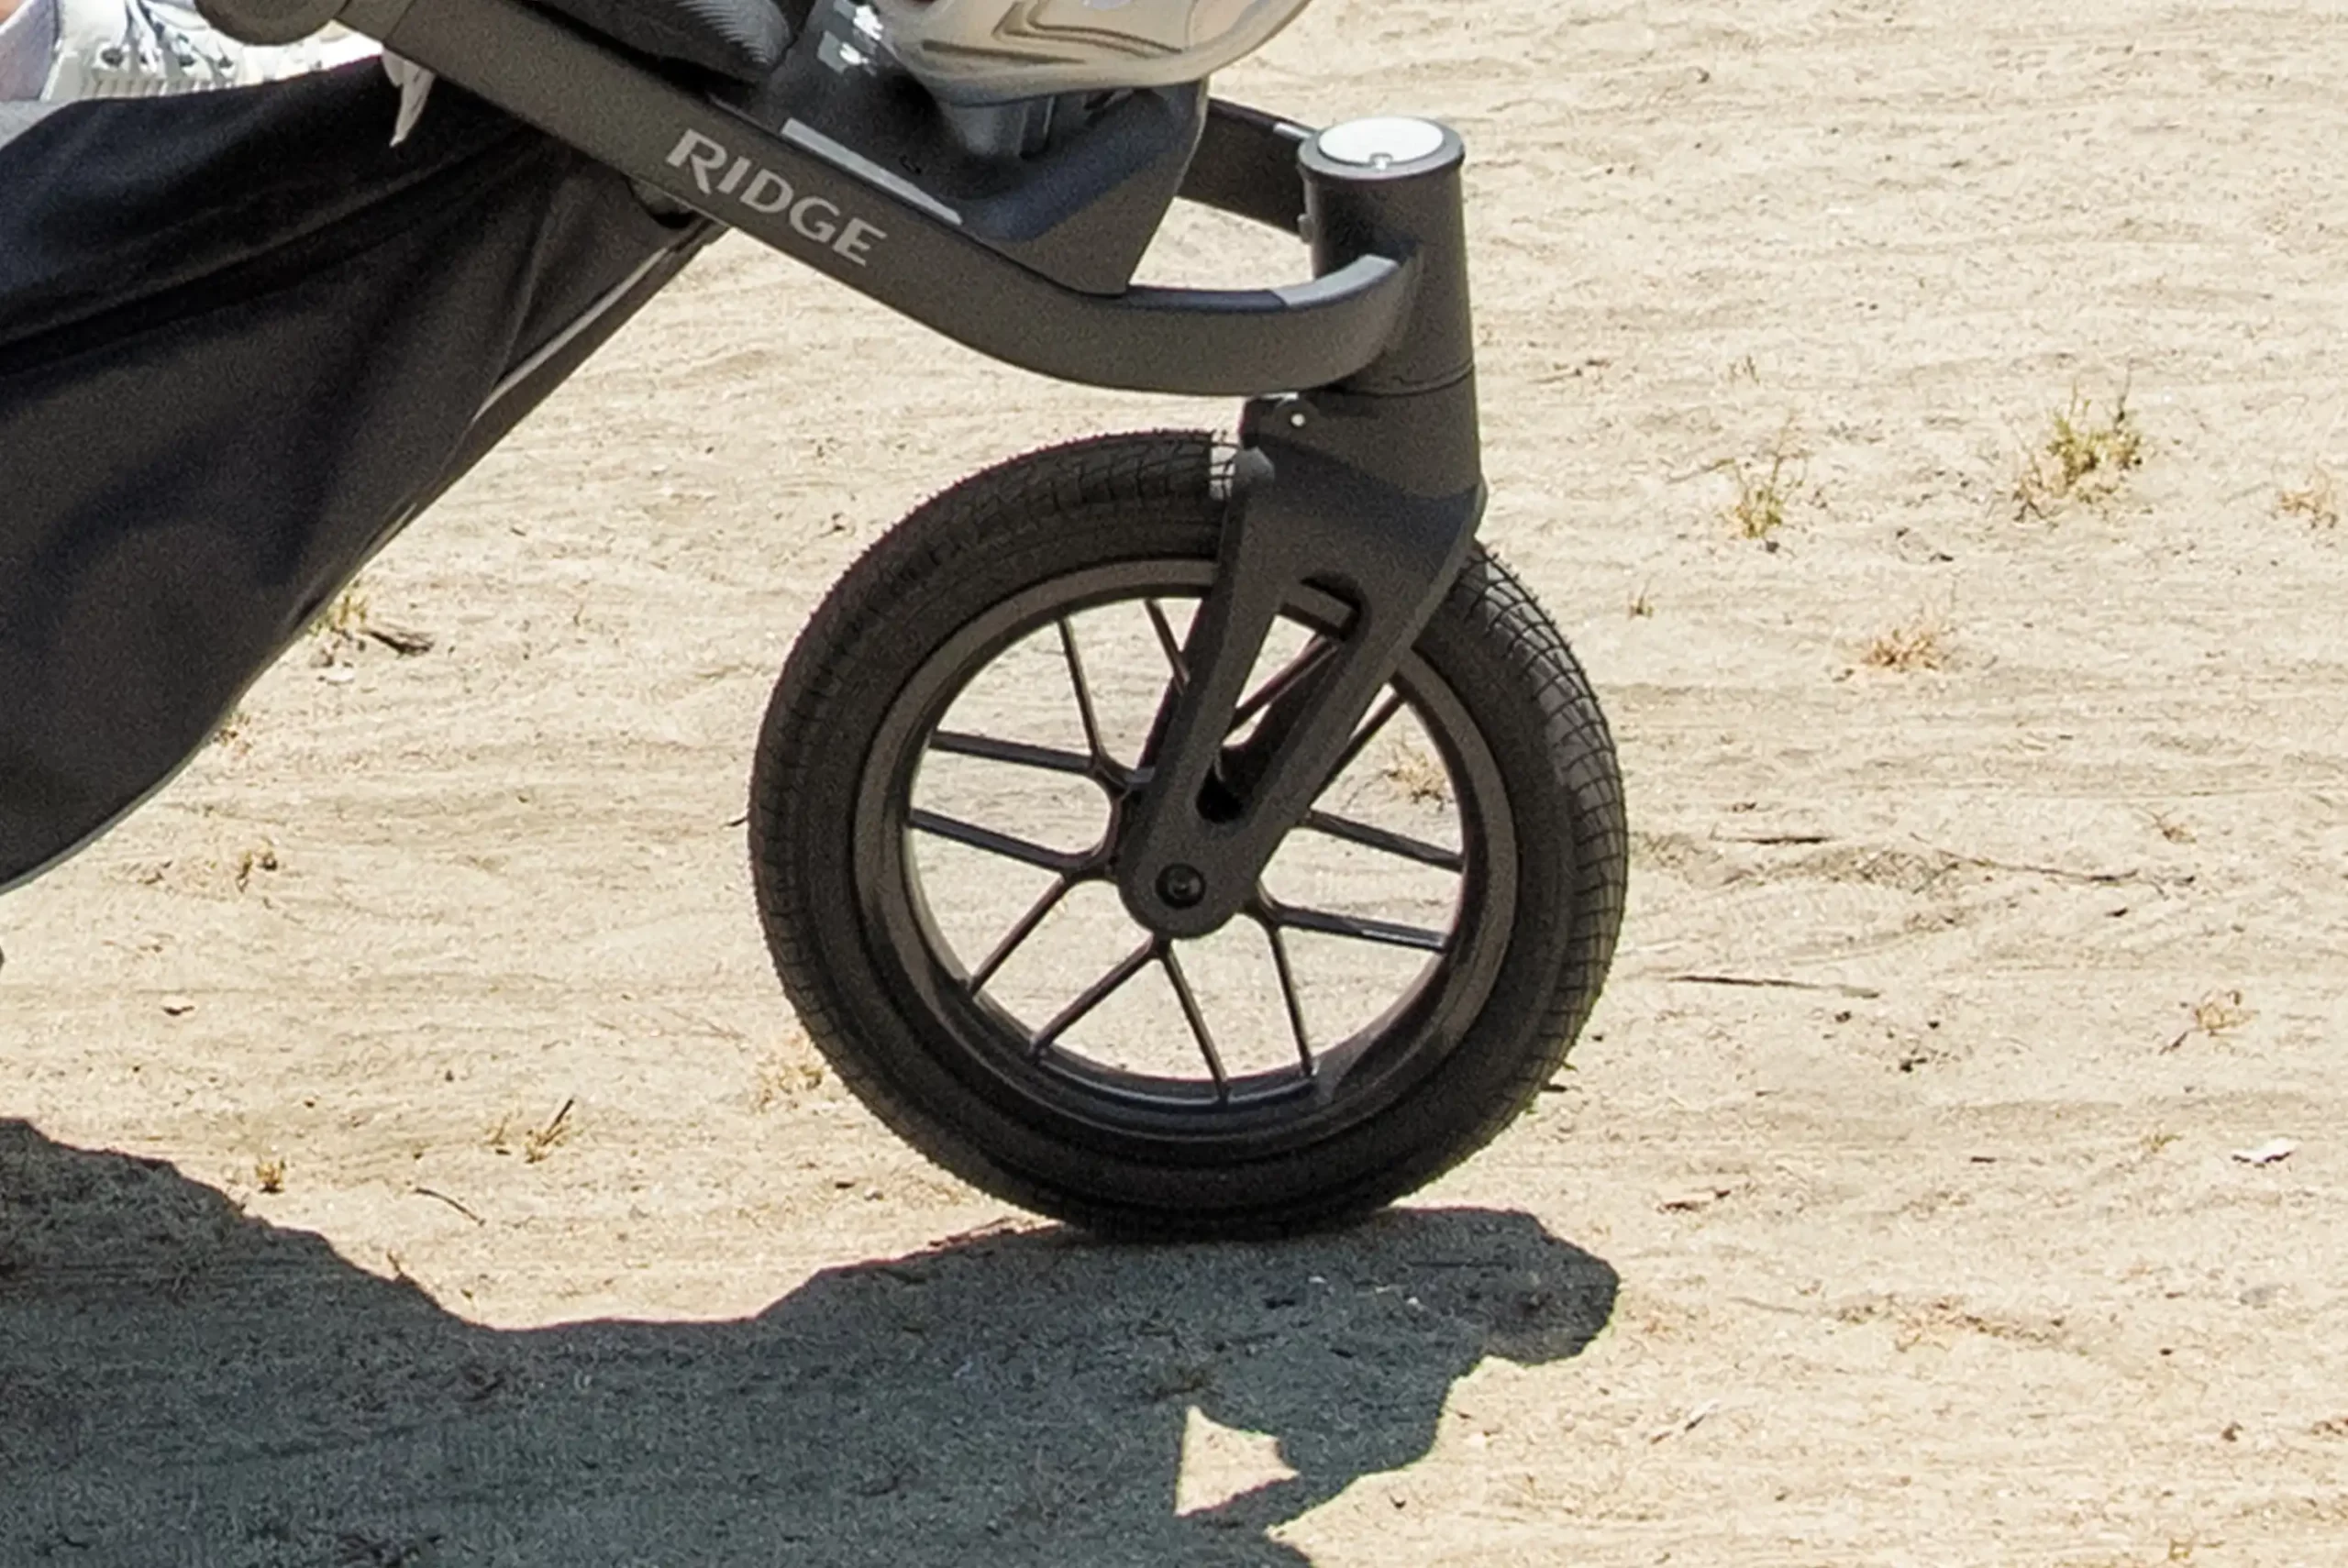 A close up on the Ridge's swivel-locking front wheel, which is one of the three deep tread wheels on the stroller that do not require inflation